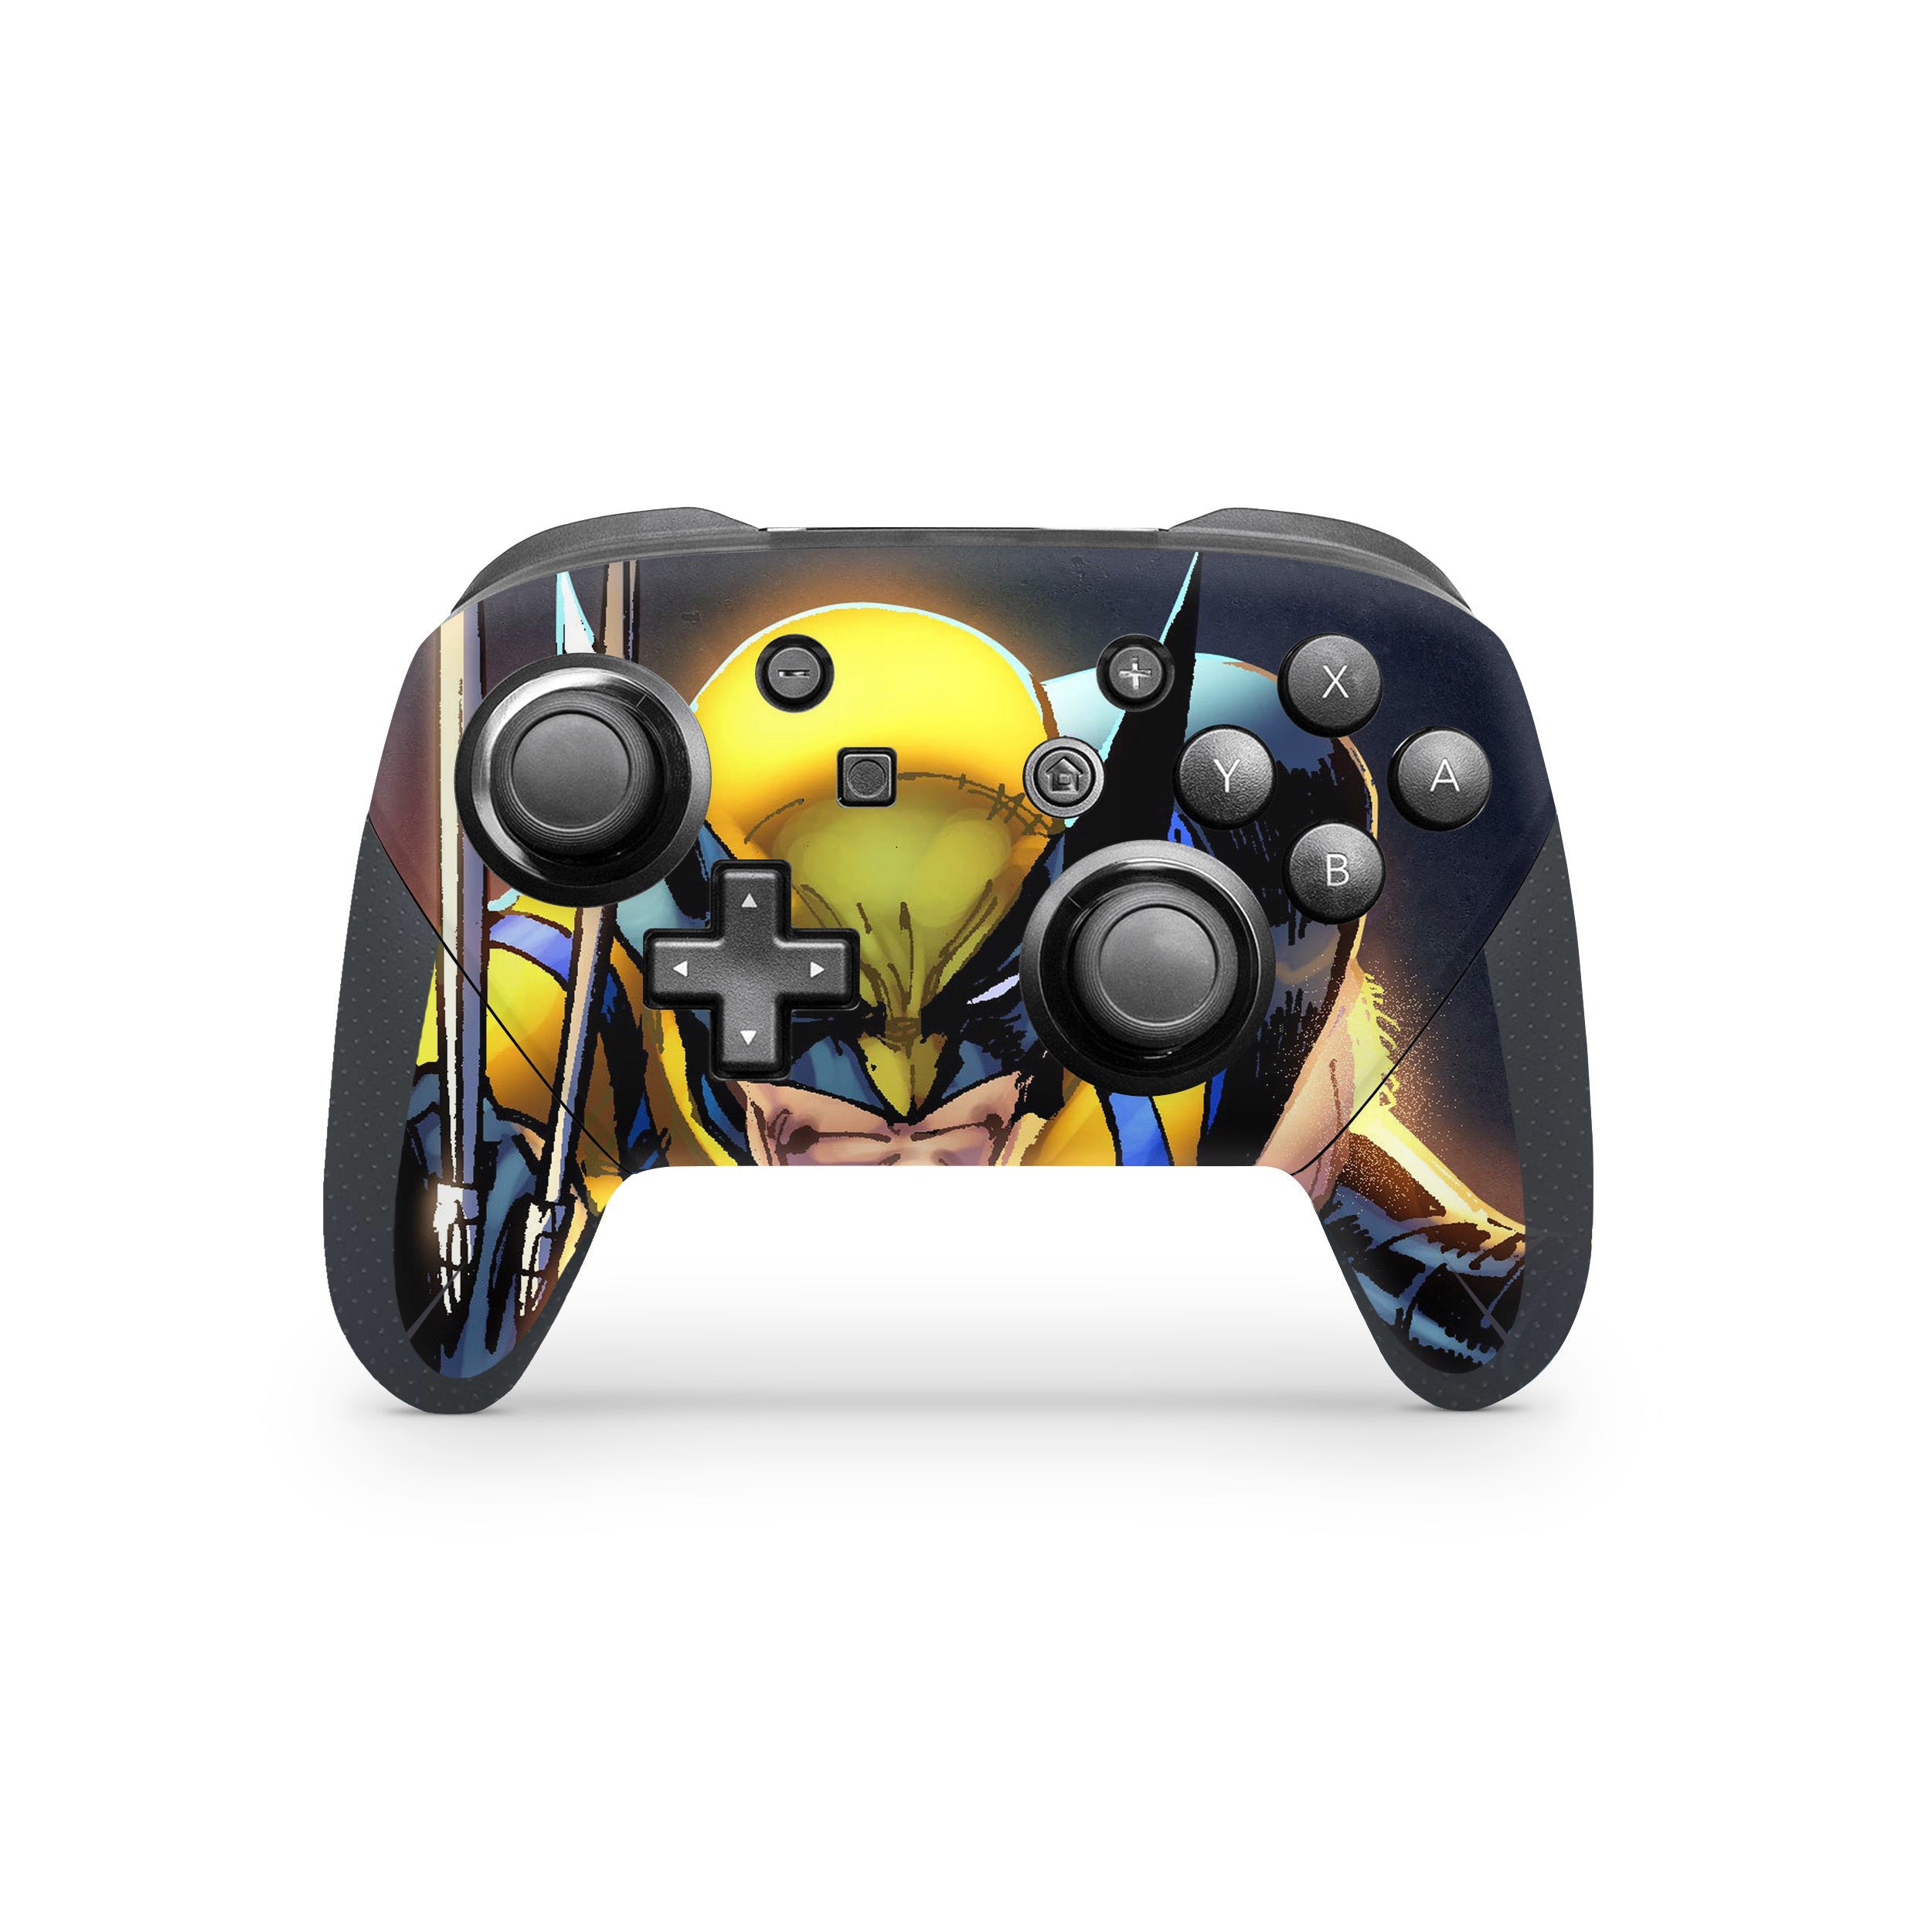 A video game skin featuring a Marvel X Men Wolverine design for the Switch Pro Controller.